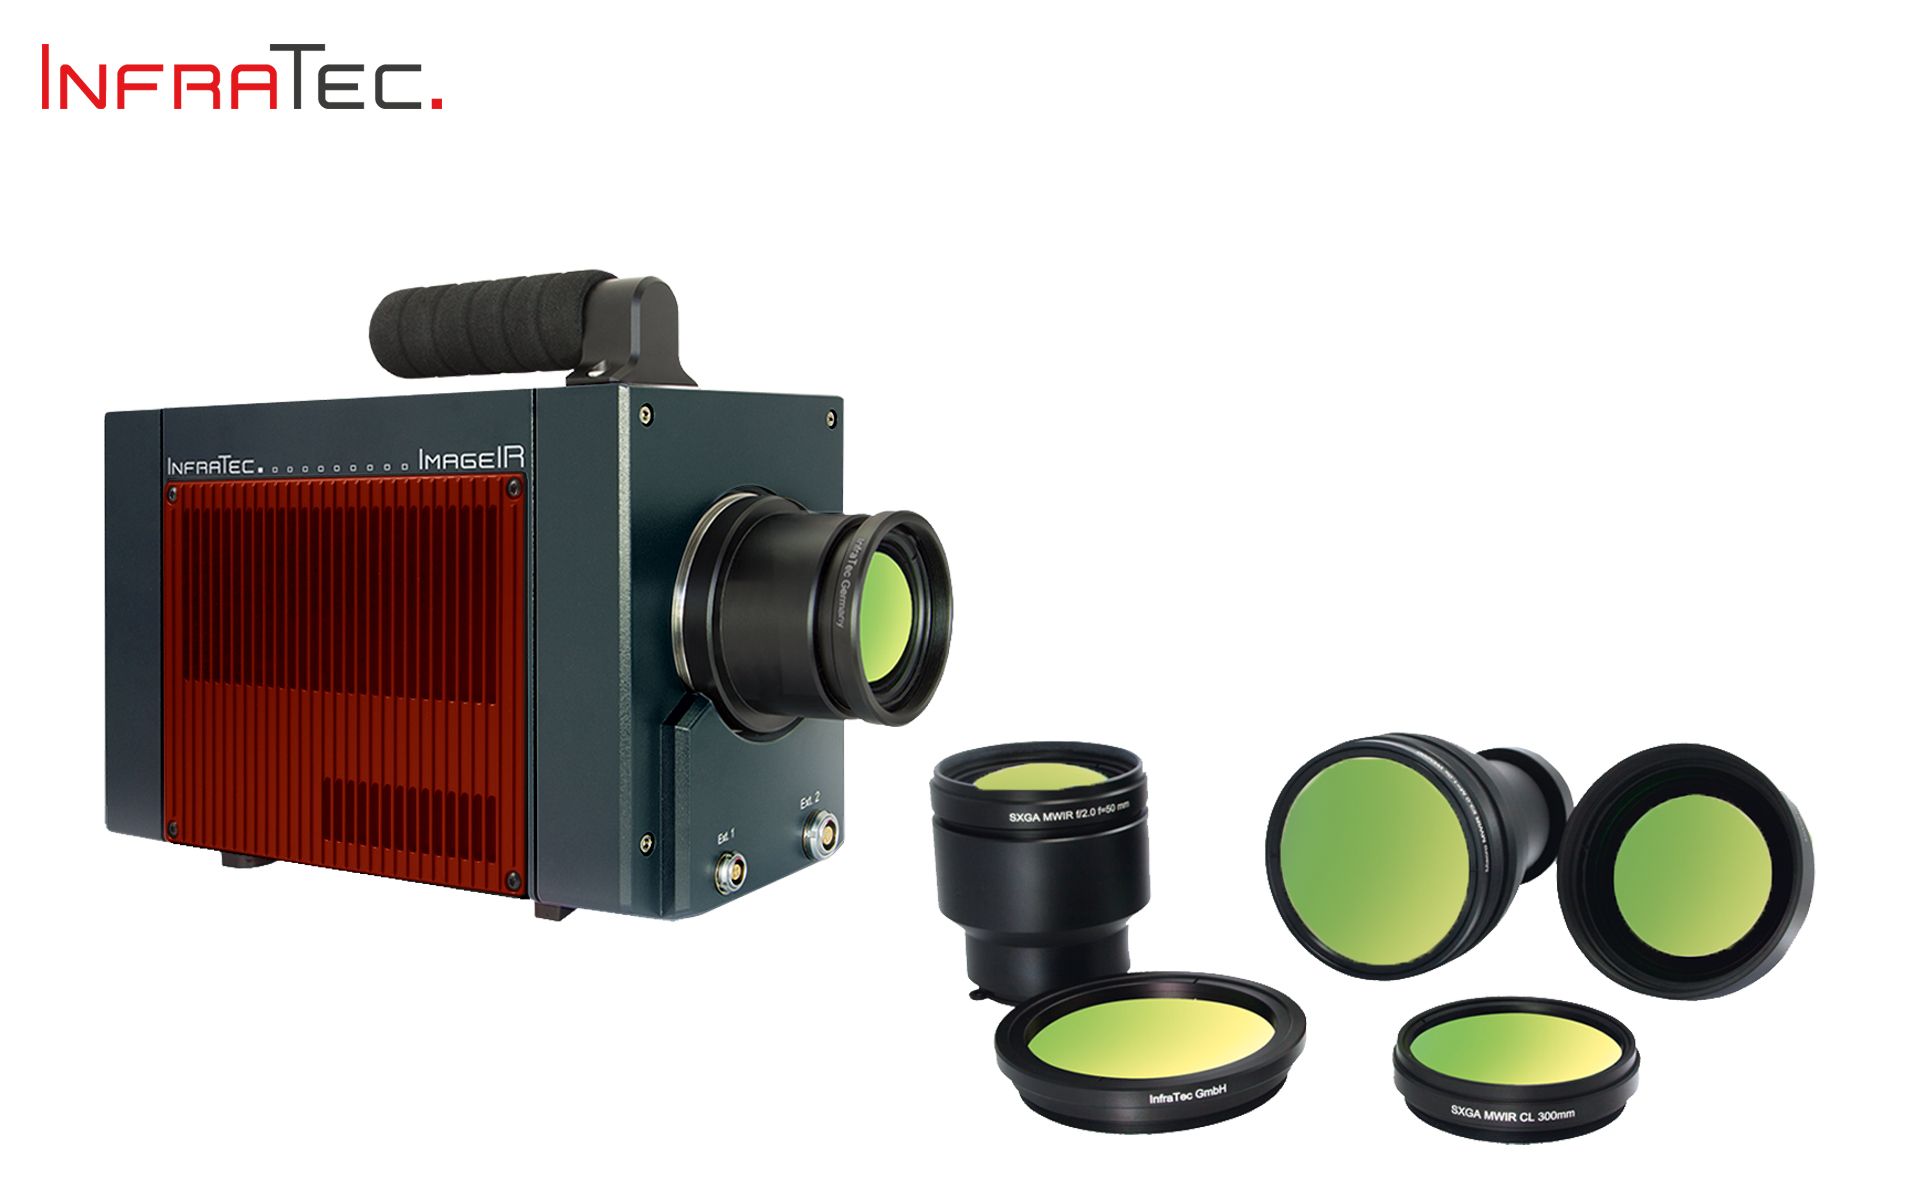 Infratec Imageir 9400 Hp Lenses